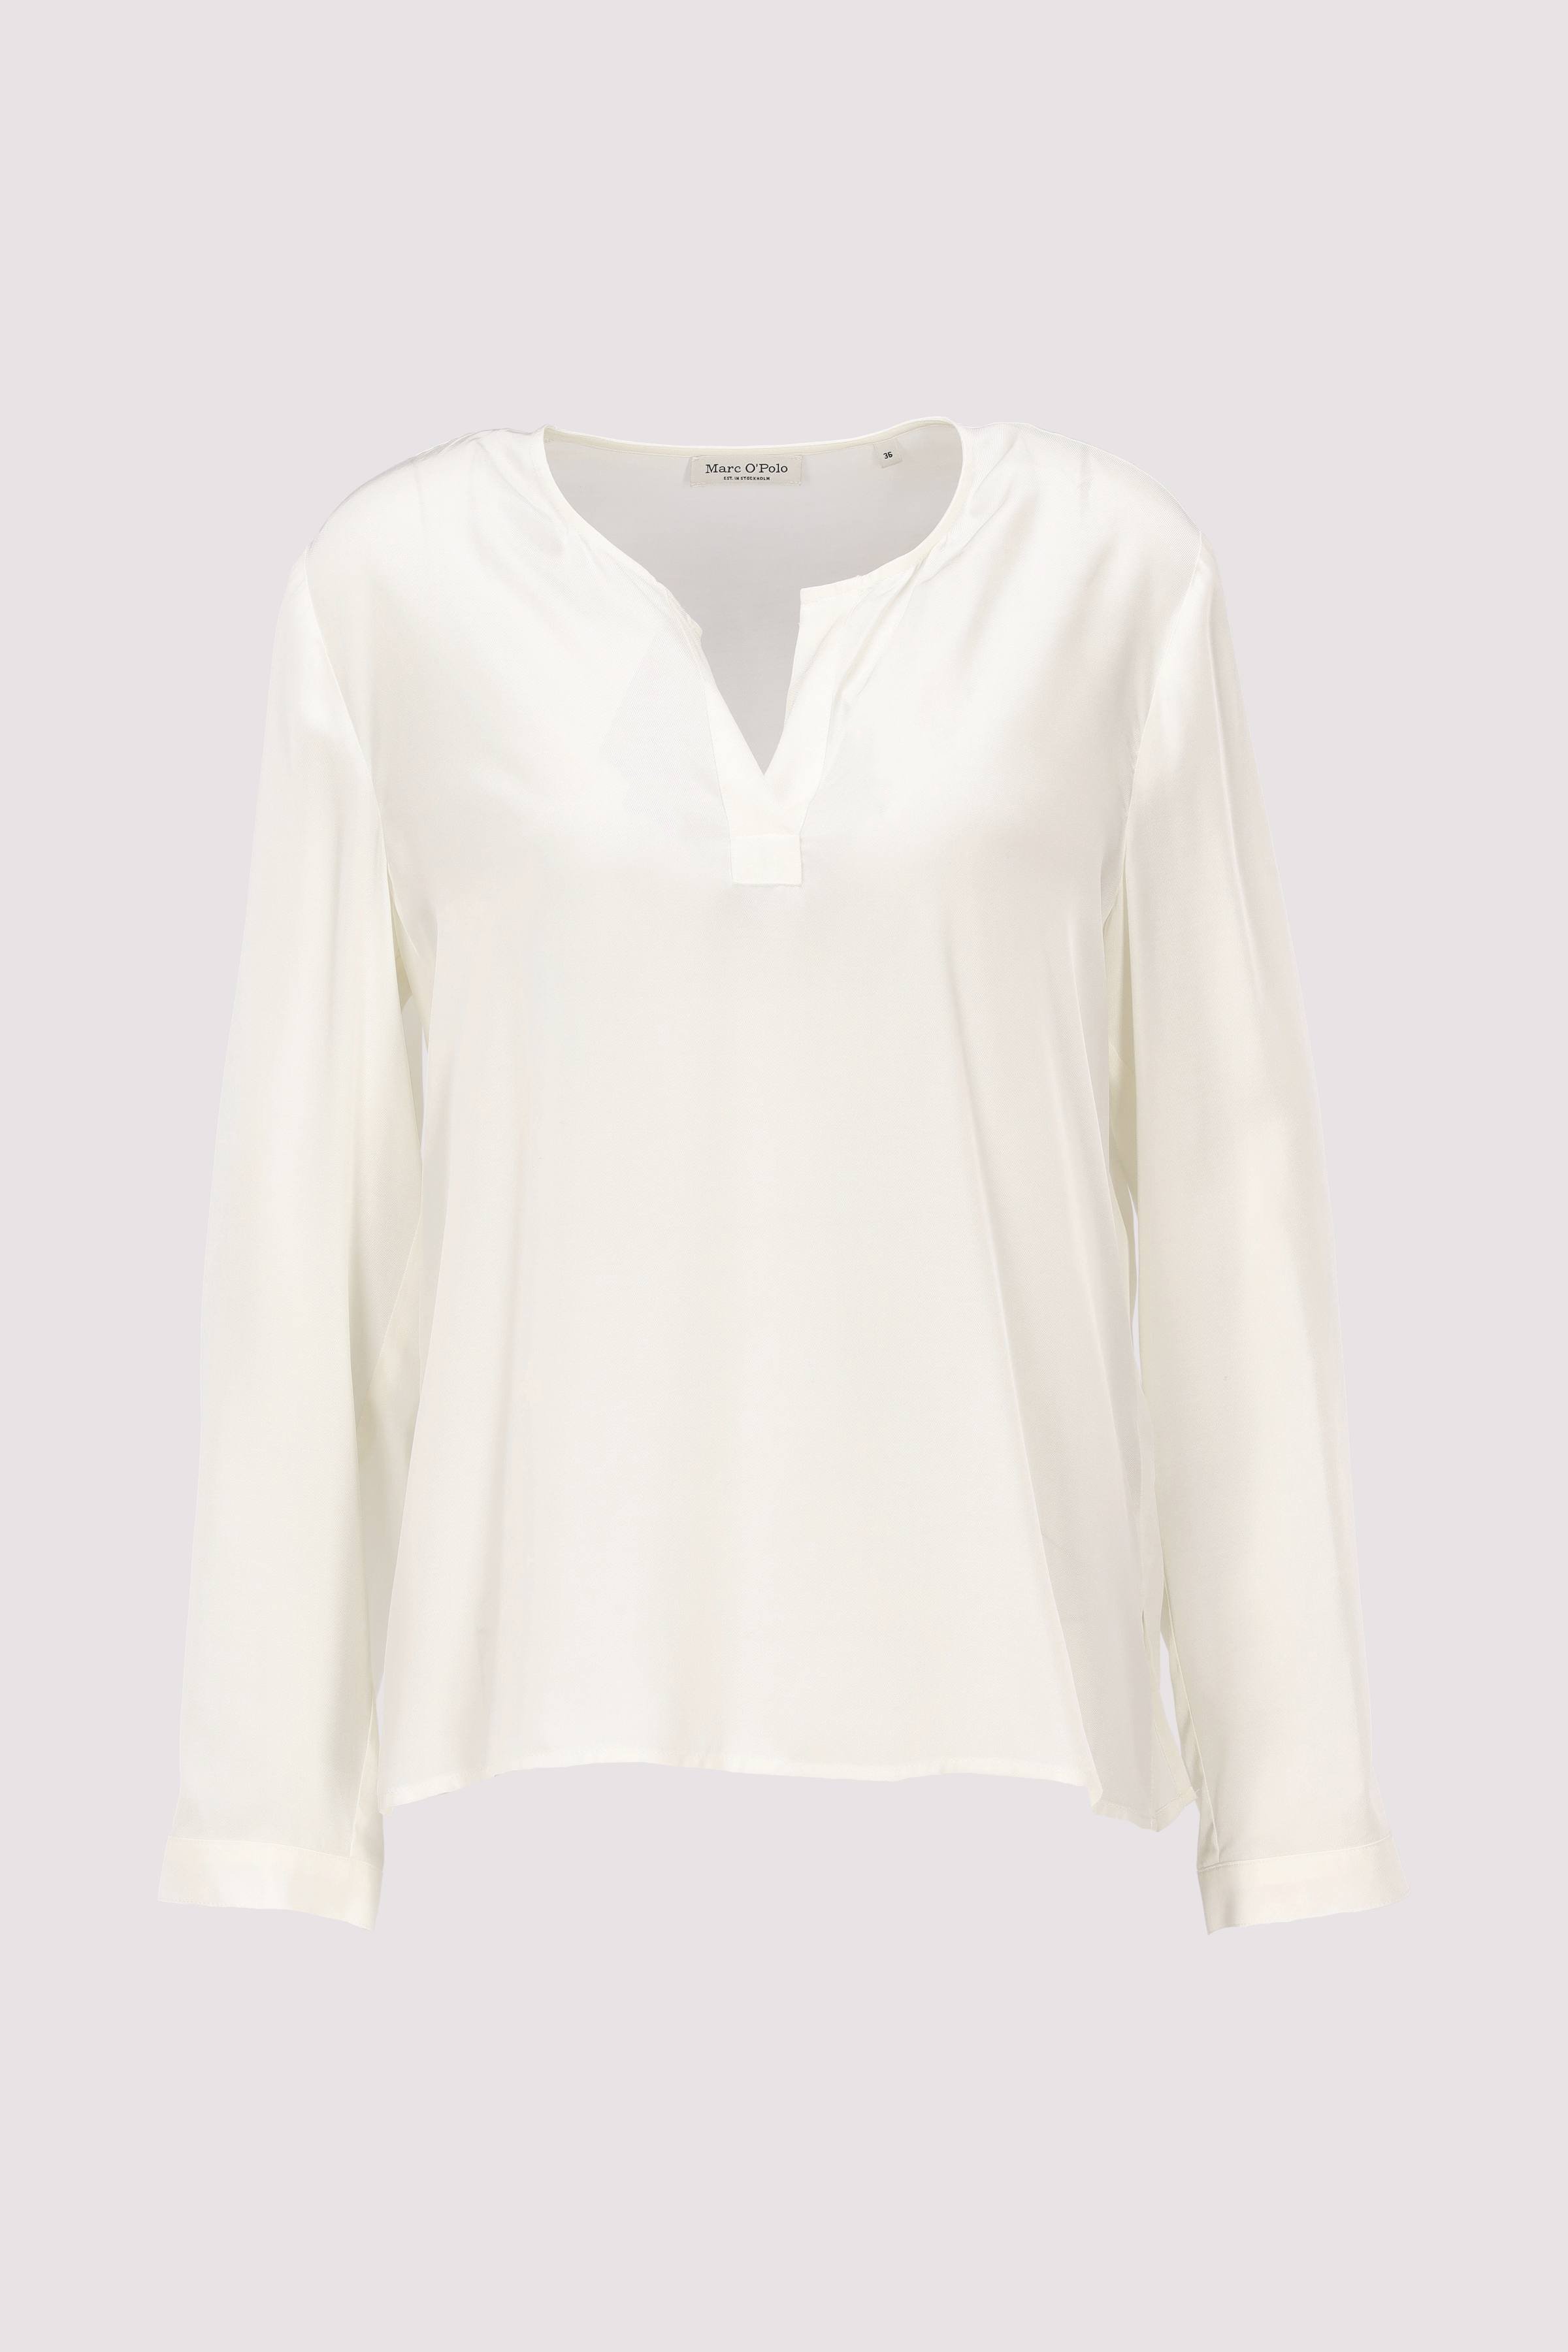 Blouse, straight fit, long sle